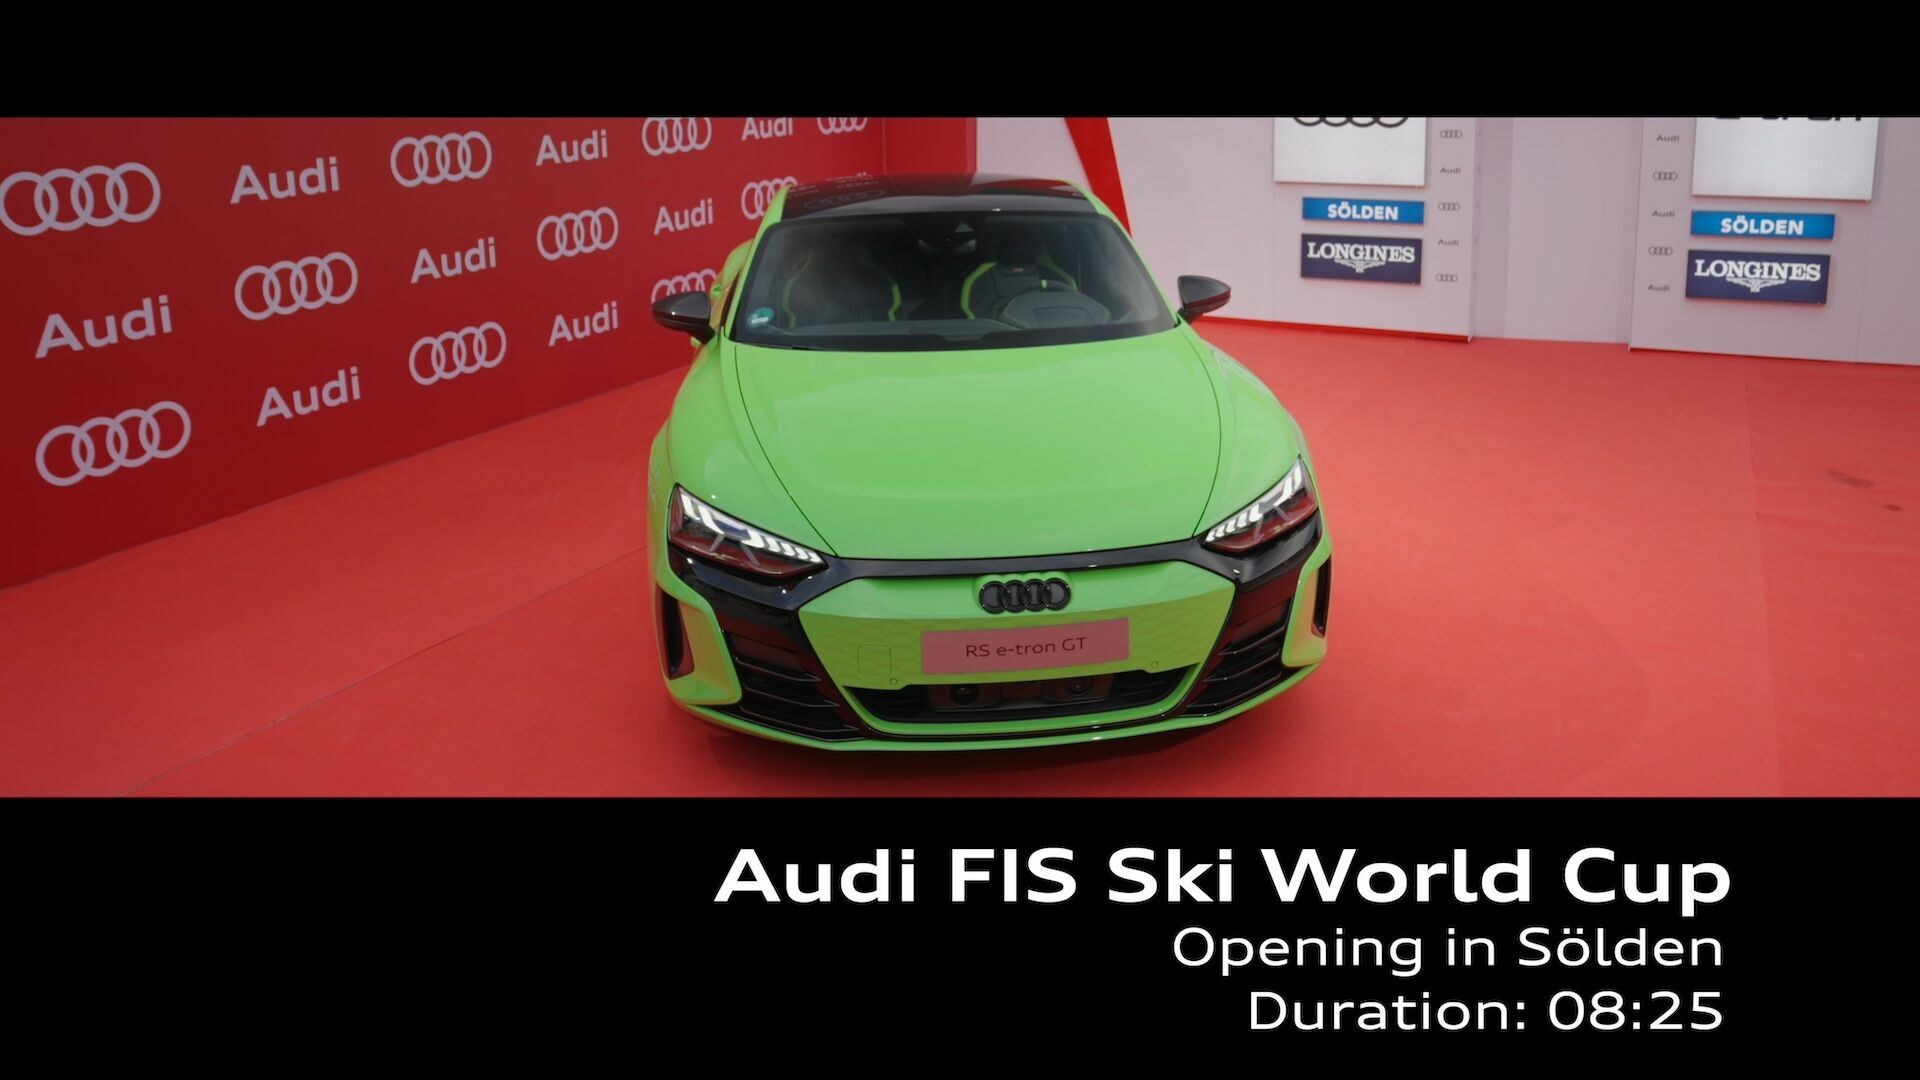 Audi FIS Ski World Cup Opening – Footage